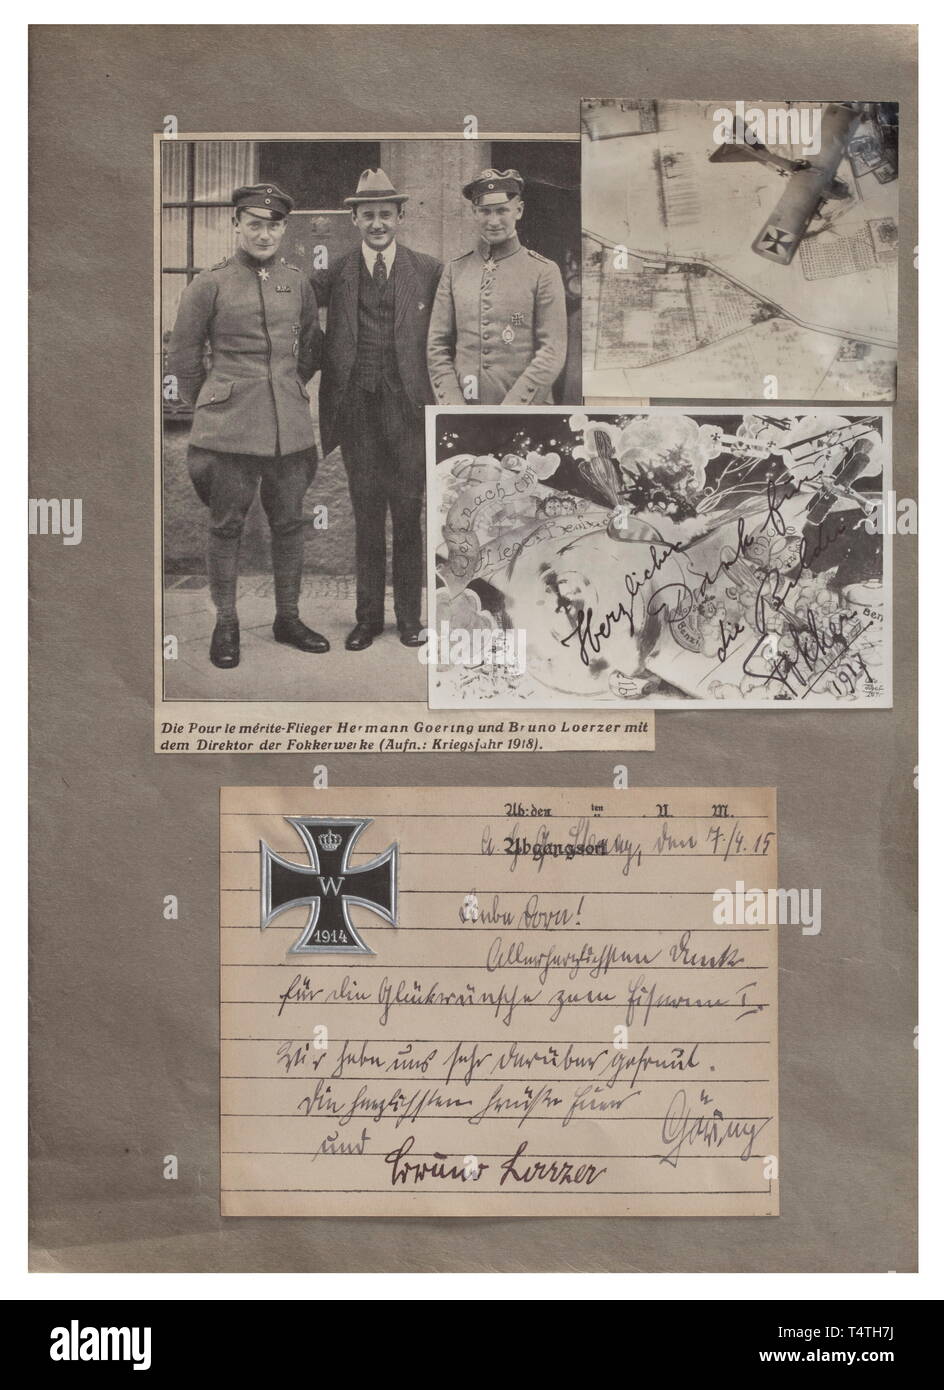 Hermann Göring, Bruno Loerzer and Anton Fokker - a joint congratulation card on the award of the Iron Cross 1st Class. Dated 7 April 1915, composed by Göring in ink, signed 'Göring' and 'Bruno Loerzer'. Together with an ink autograph 'Herzlichen Dank für die Bilder - Fokker 1917' (Heartfelt thanks for the pictures - Fokker 1917). Also, two photos and newspaper clippings mounted on cardboard. From the legacy of former First World War pilot G. Kirchhoff. historic, historical, troop, troops, armed forces, military, militaria, army, wing, group, air , Additional-Rights-Clearance-Info-Not-Available Stock Photo